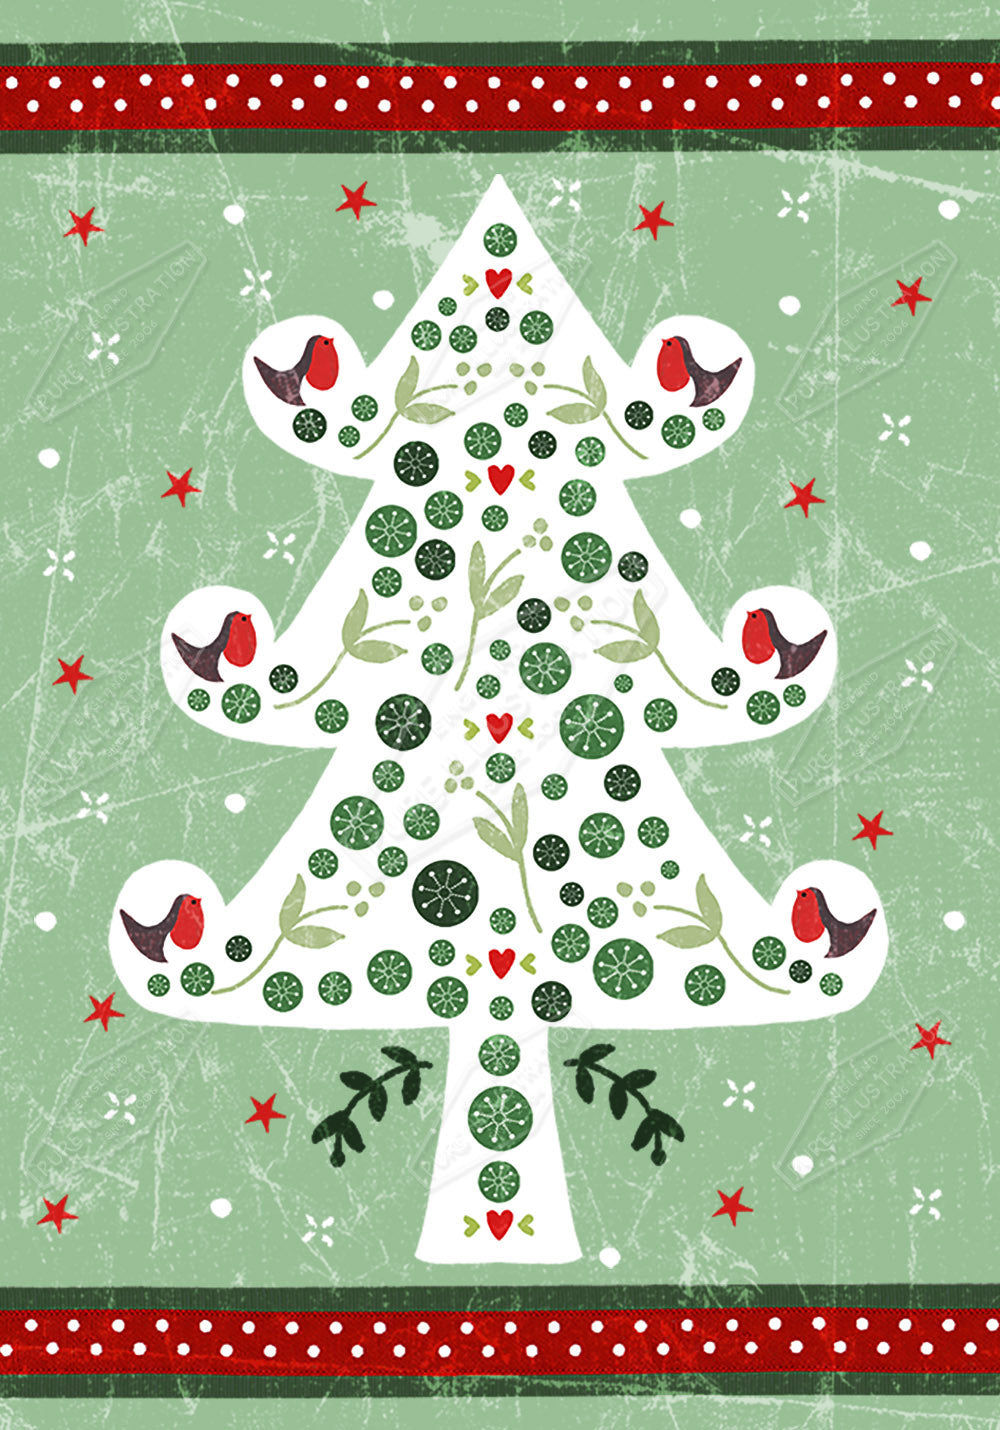 00025546SSNa- Sian Summerhayes is represented by Pure Art Licensing Agency - Christmas Greeting Card Design